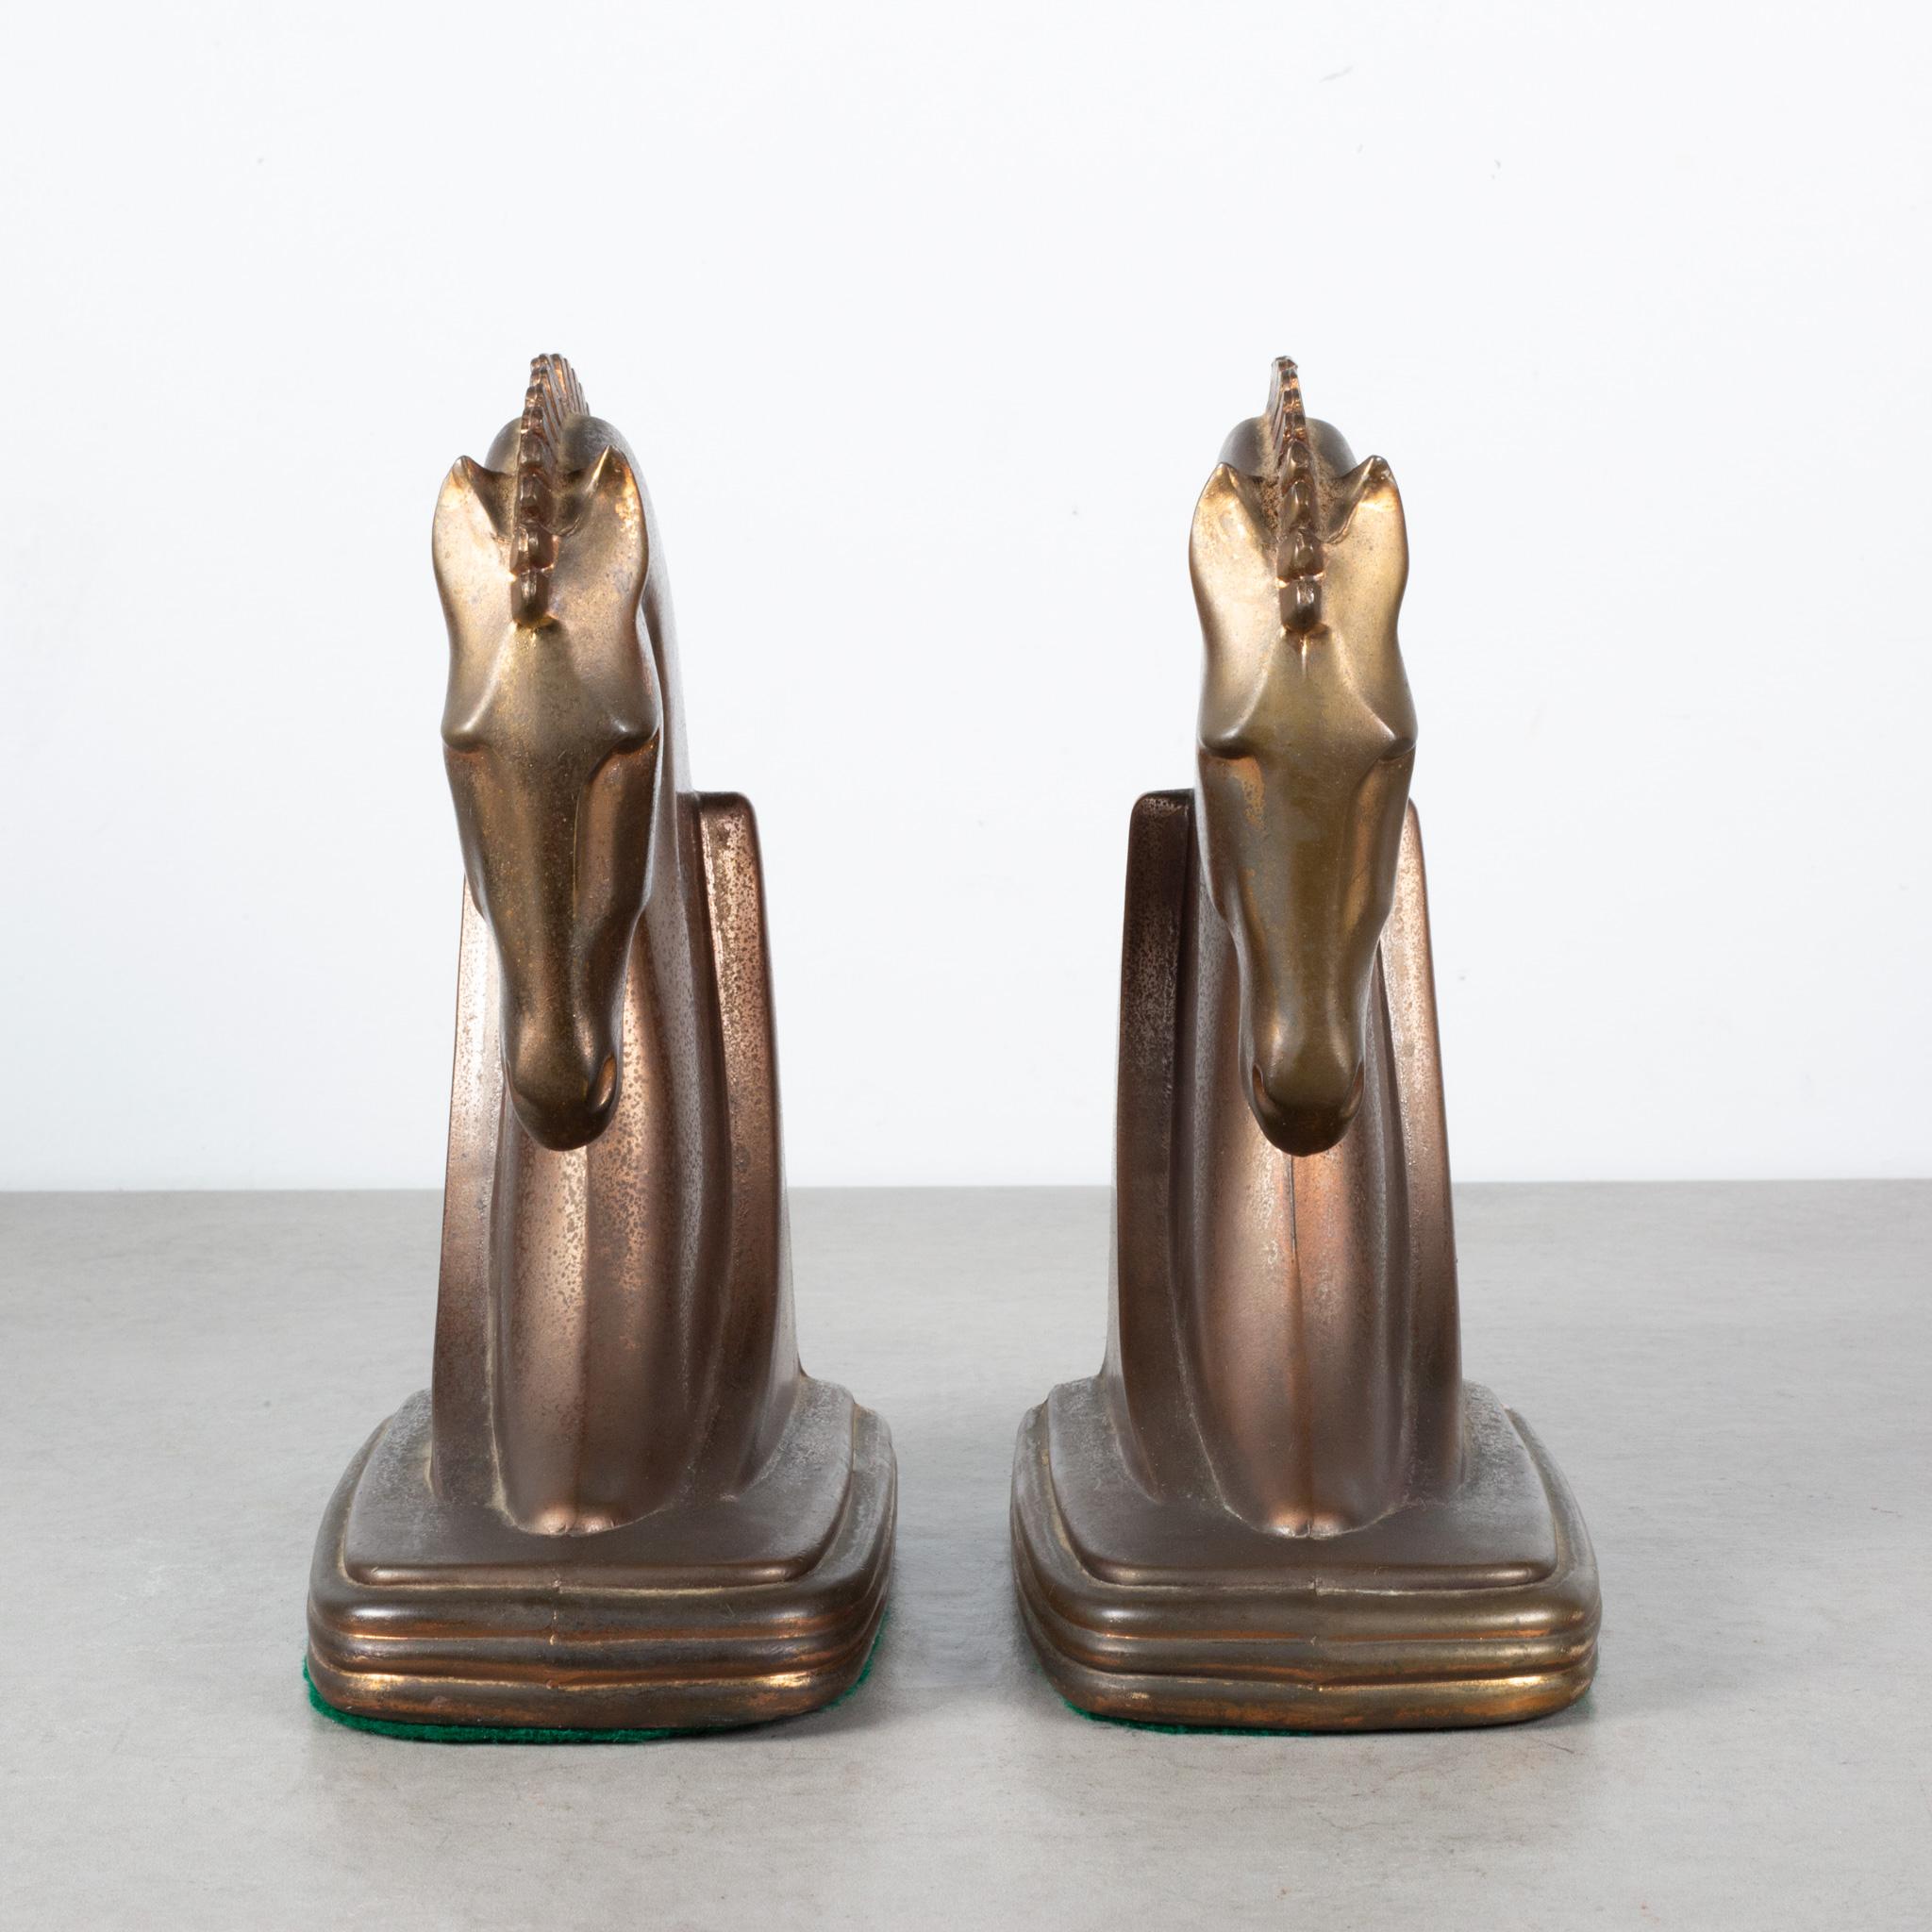 Art Deco Bronze Machine Age Trojan Horse Bookends by Dodge Inc. C.1930  (FREE SHIPPING) For Sale